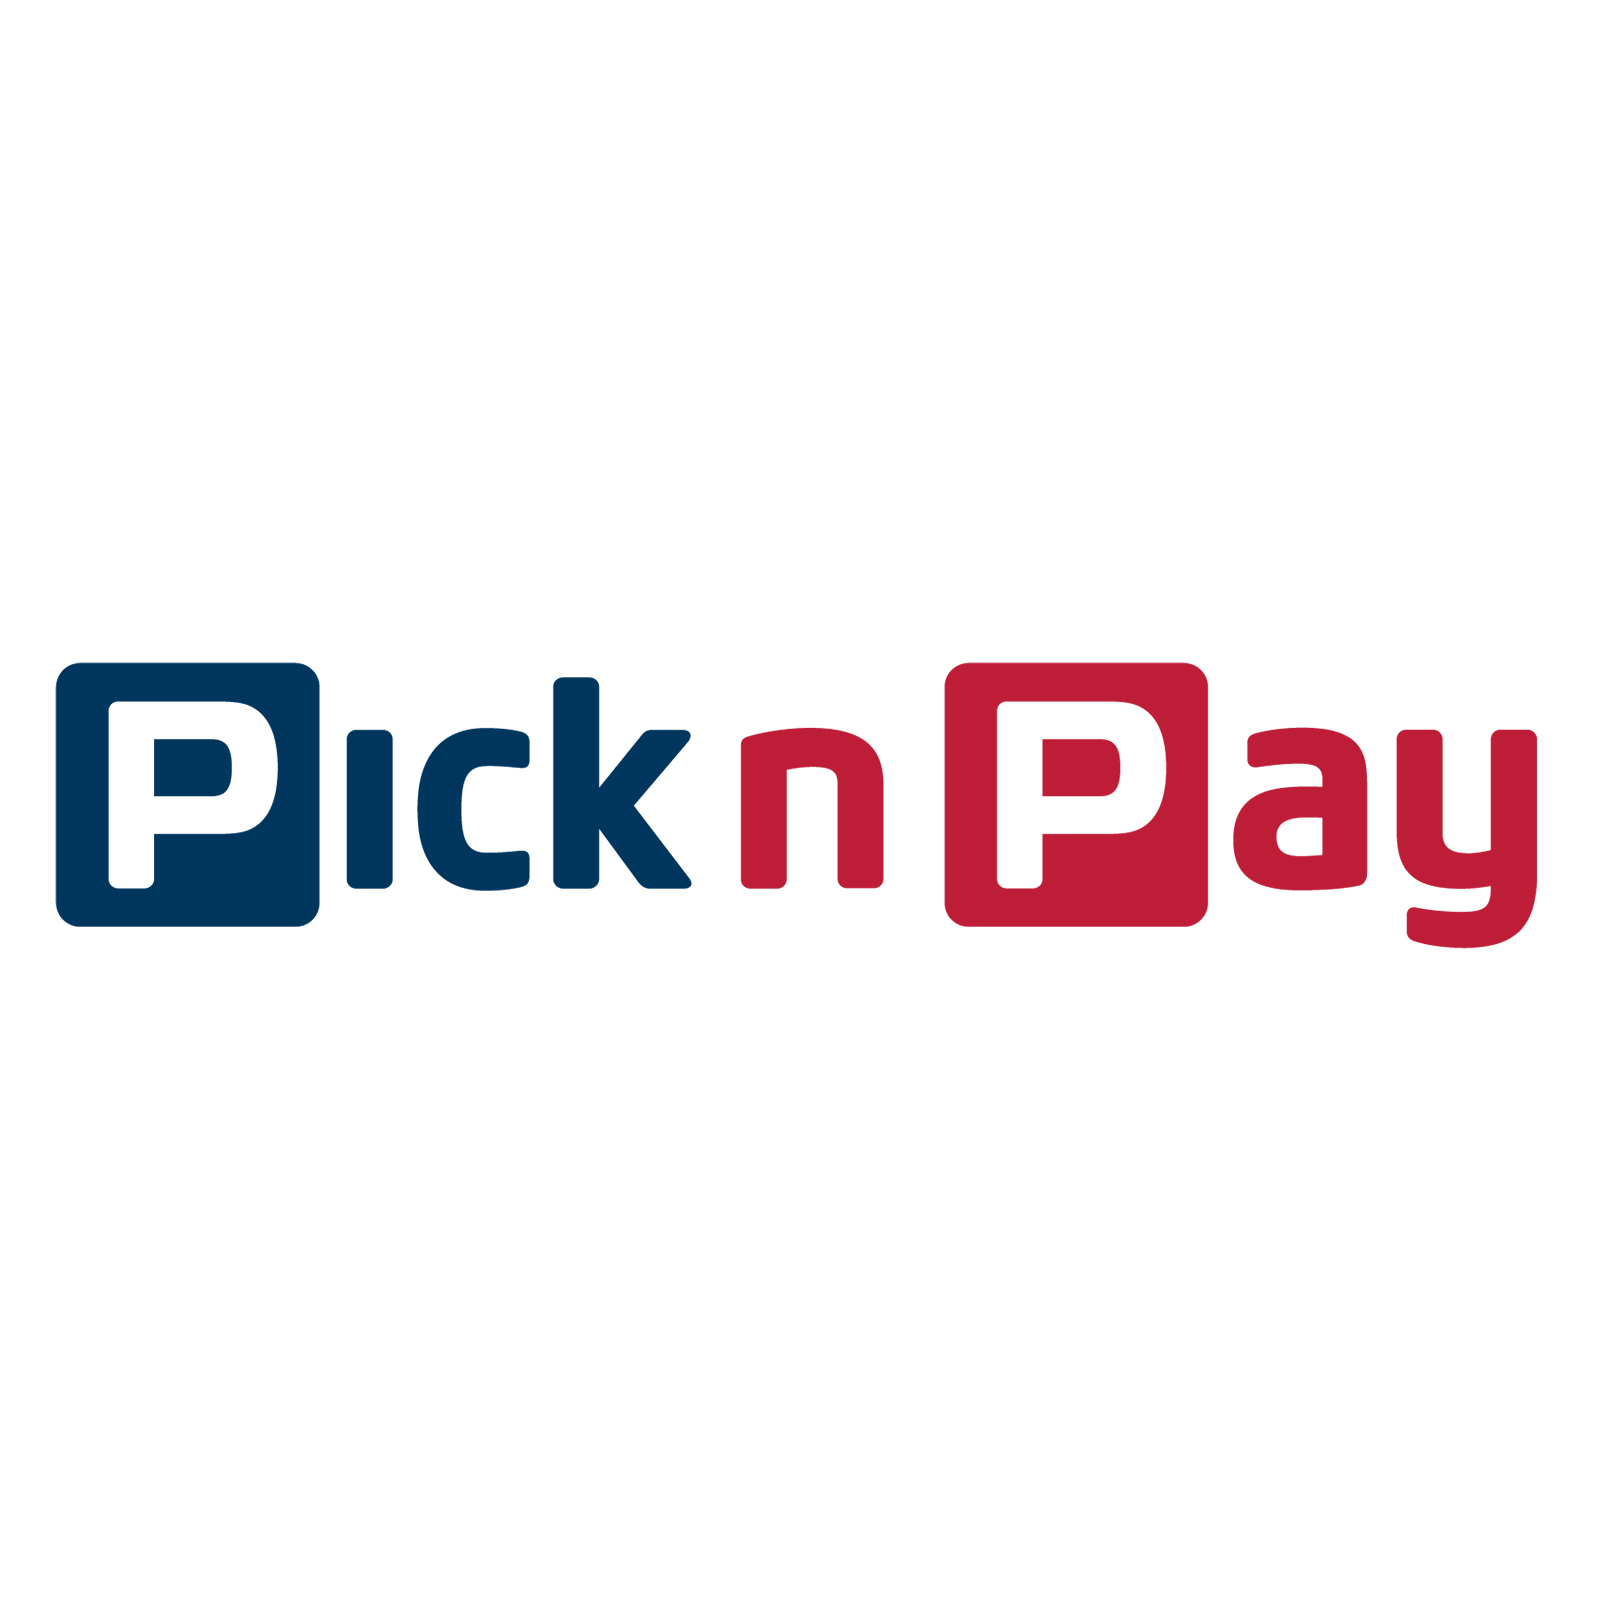 a classic blue and red logo for pick n pay retailers from south africa for the partnership of the Ladles of Love Mandela Day 2021 campaign